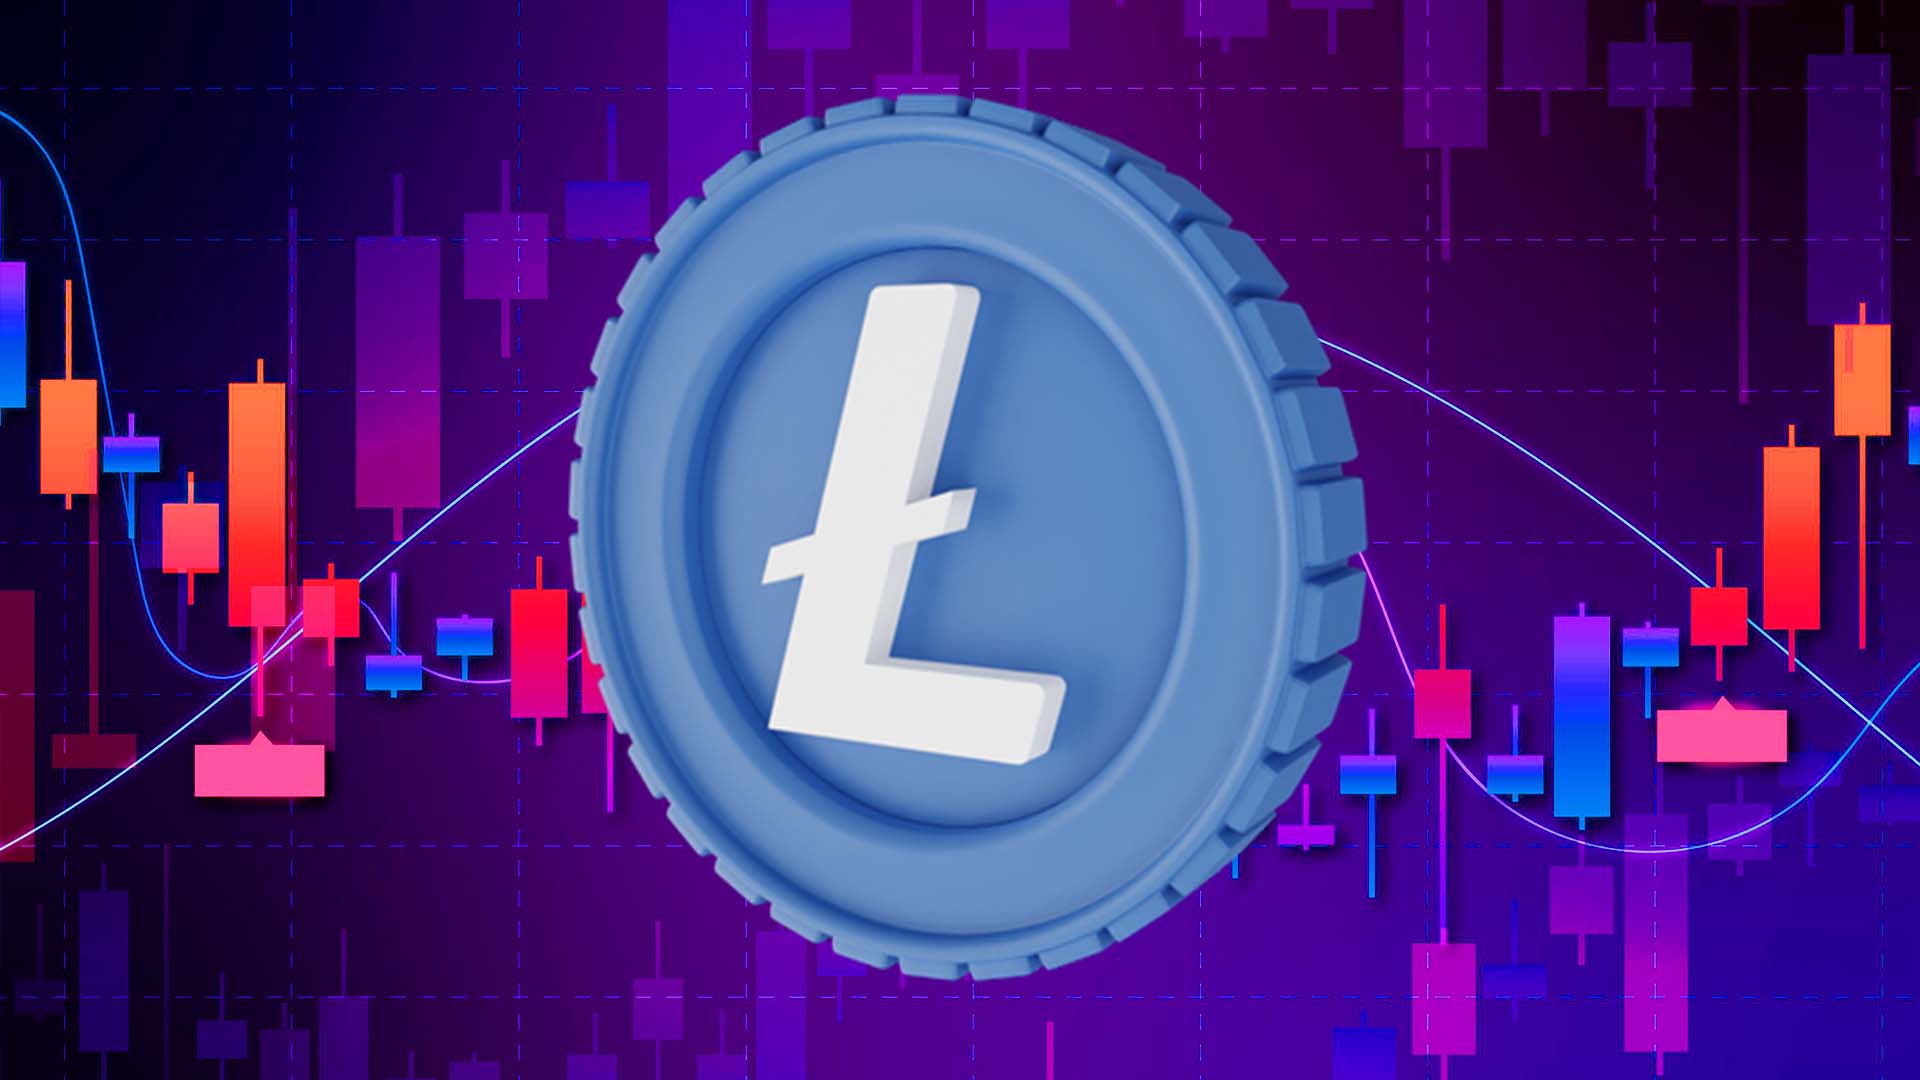 Litecoin Price Prediction: A $100 Will be Celebration Venue for Buyers if Tight Range Breaks Soon